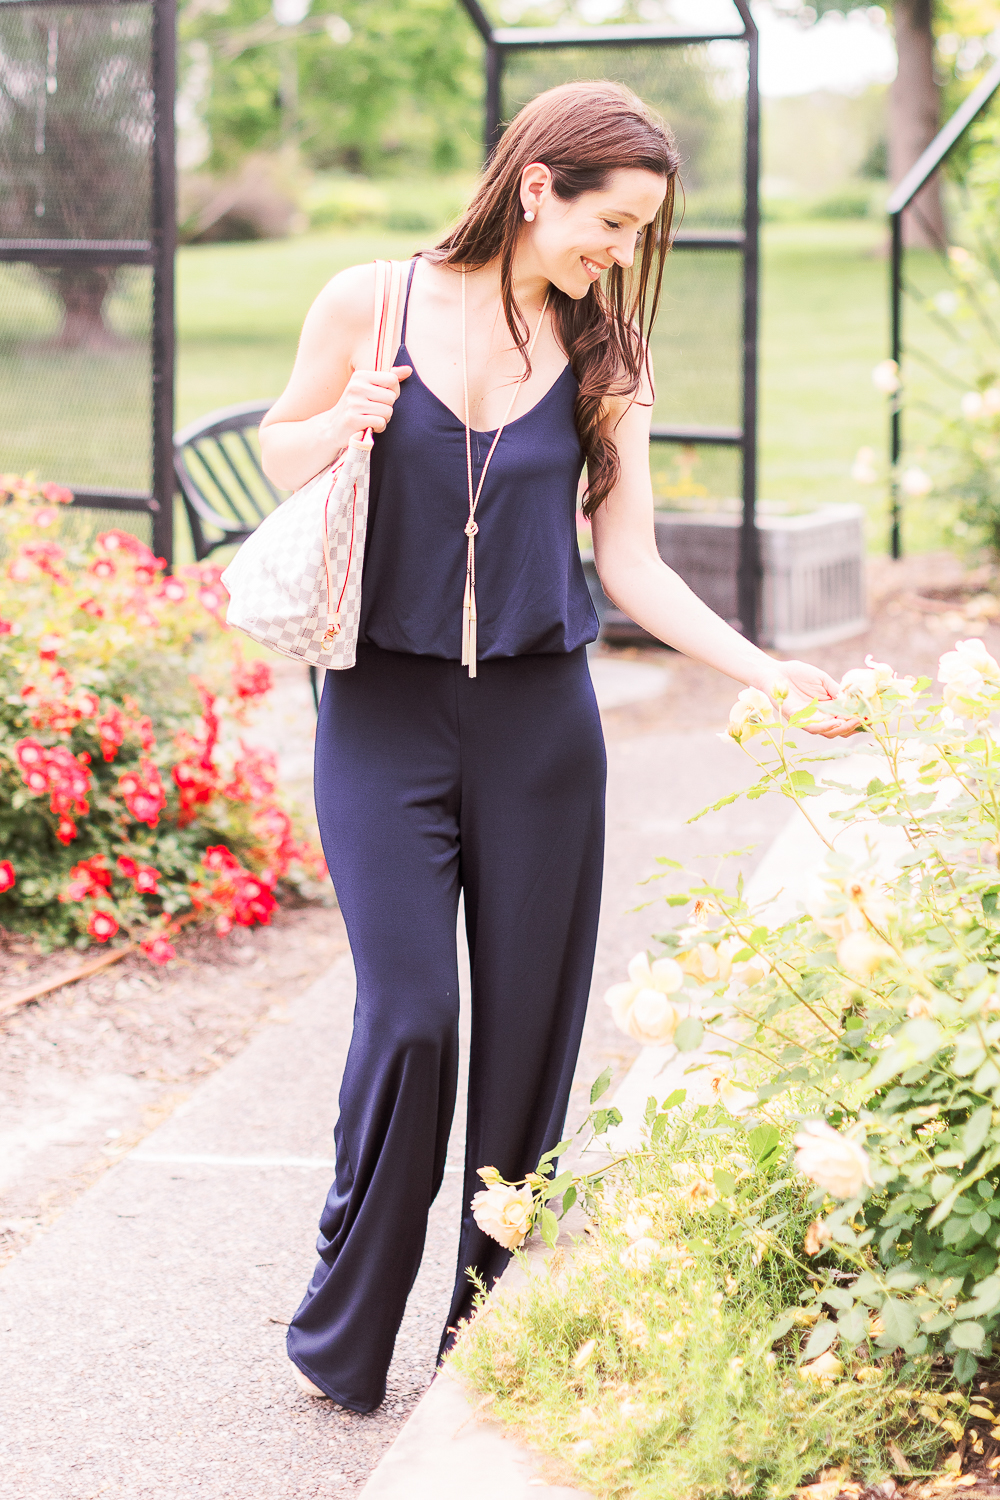 Summer Style Guide: How to Wear a Jumpsuit Casually by popular affordable fashion blogger Stephanie Ziajka from Diary of a Debutante, how to style navy jumpsuit, best shoes to wear with a jumpsuit, navy URBAN K Women's Racerback Jumpsuit, Louis Vuitton Neverfull Dupe Bag, Kendra Scott Phara Necklace